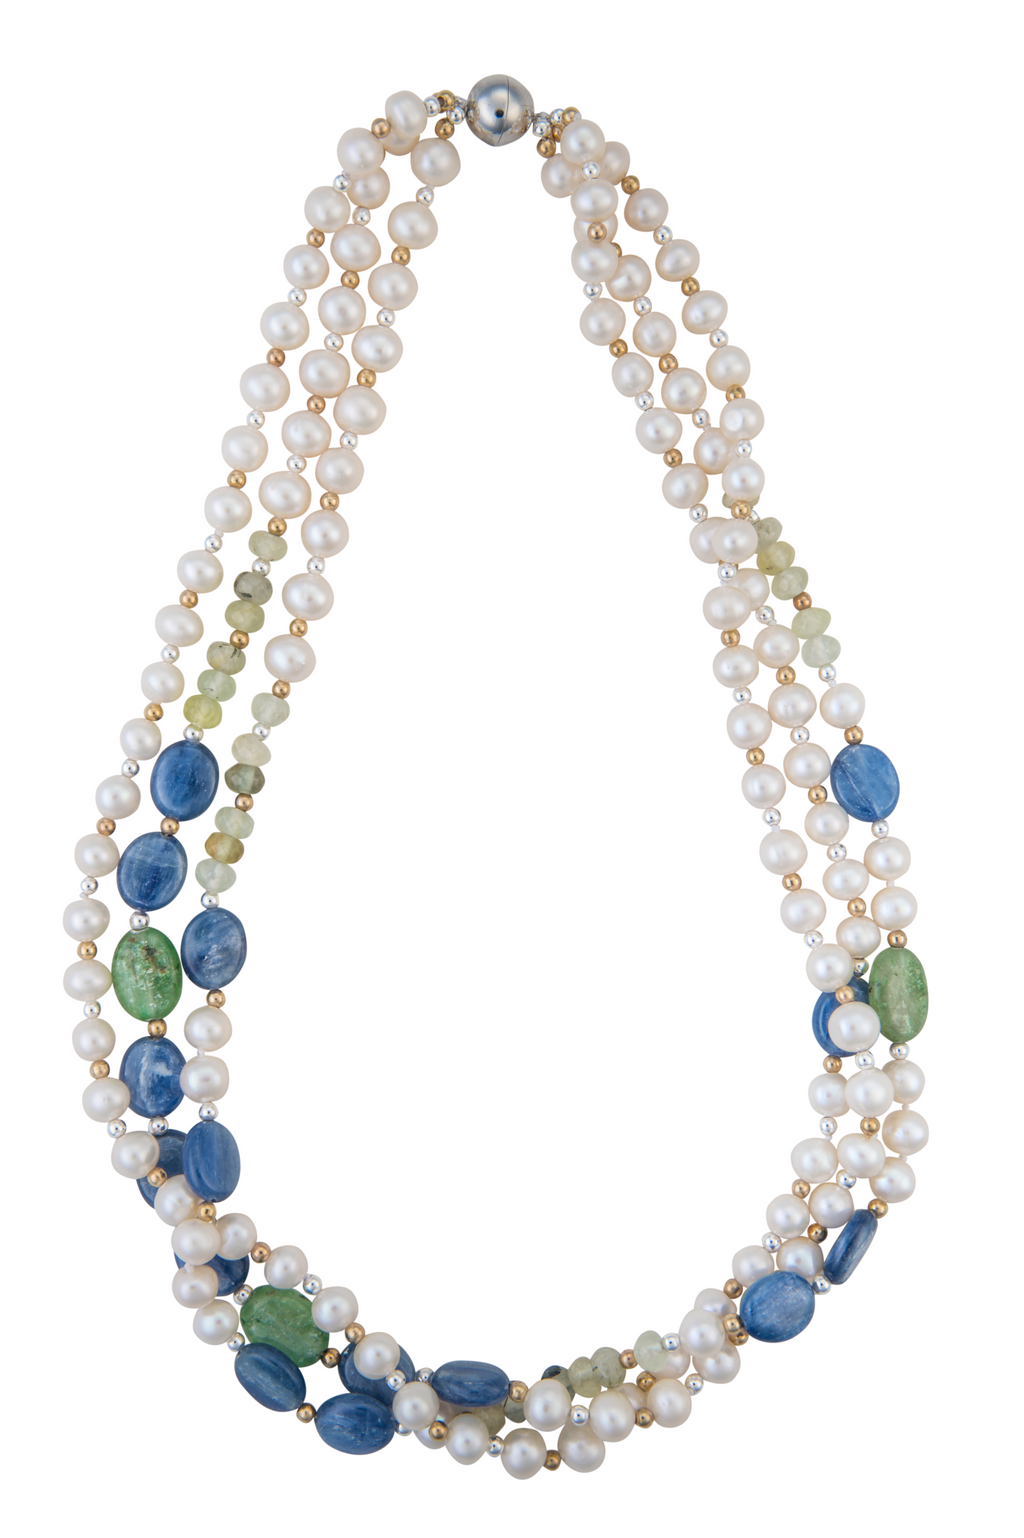 Pearl, lapis, and hairstone necklace